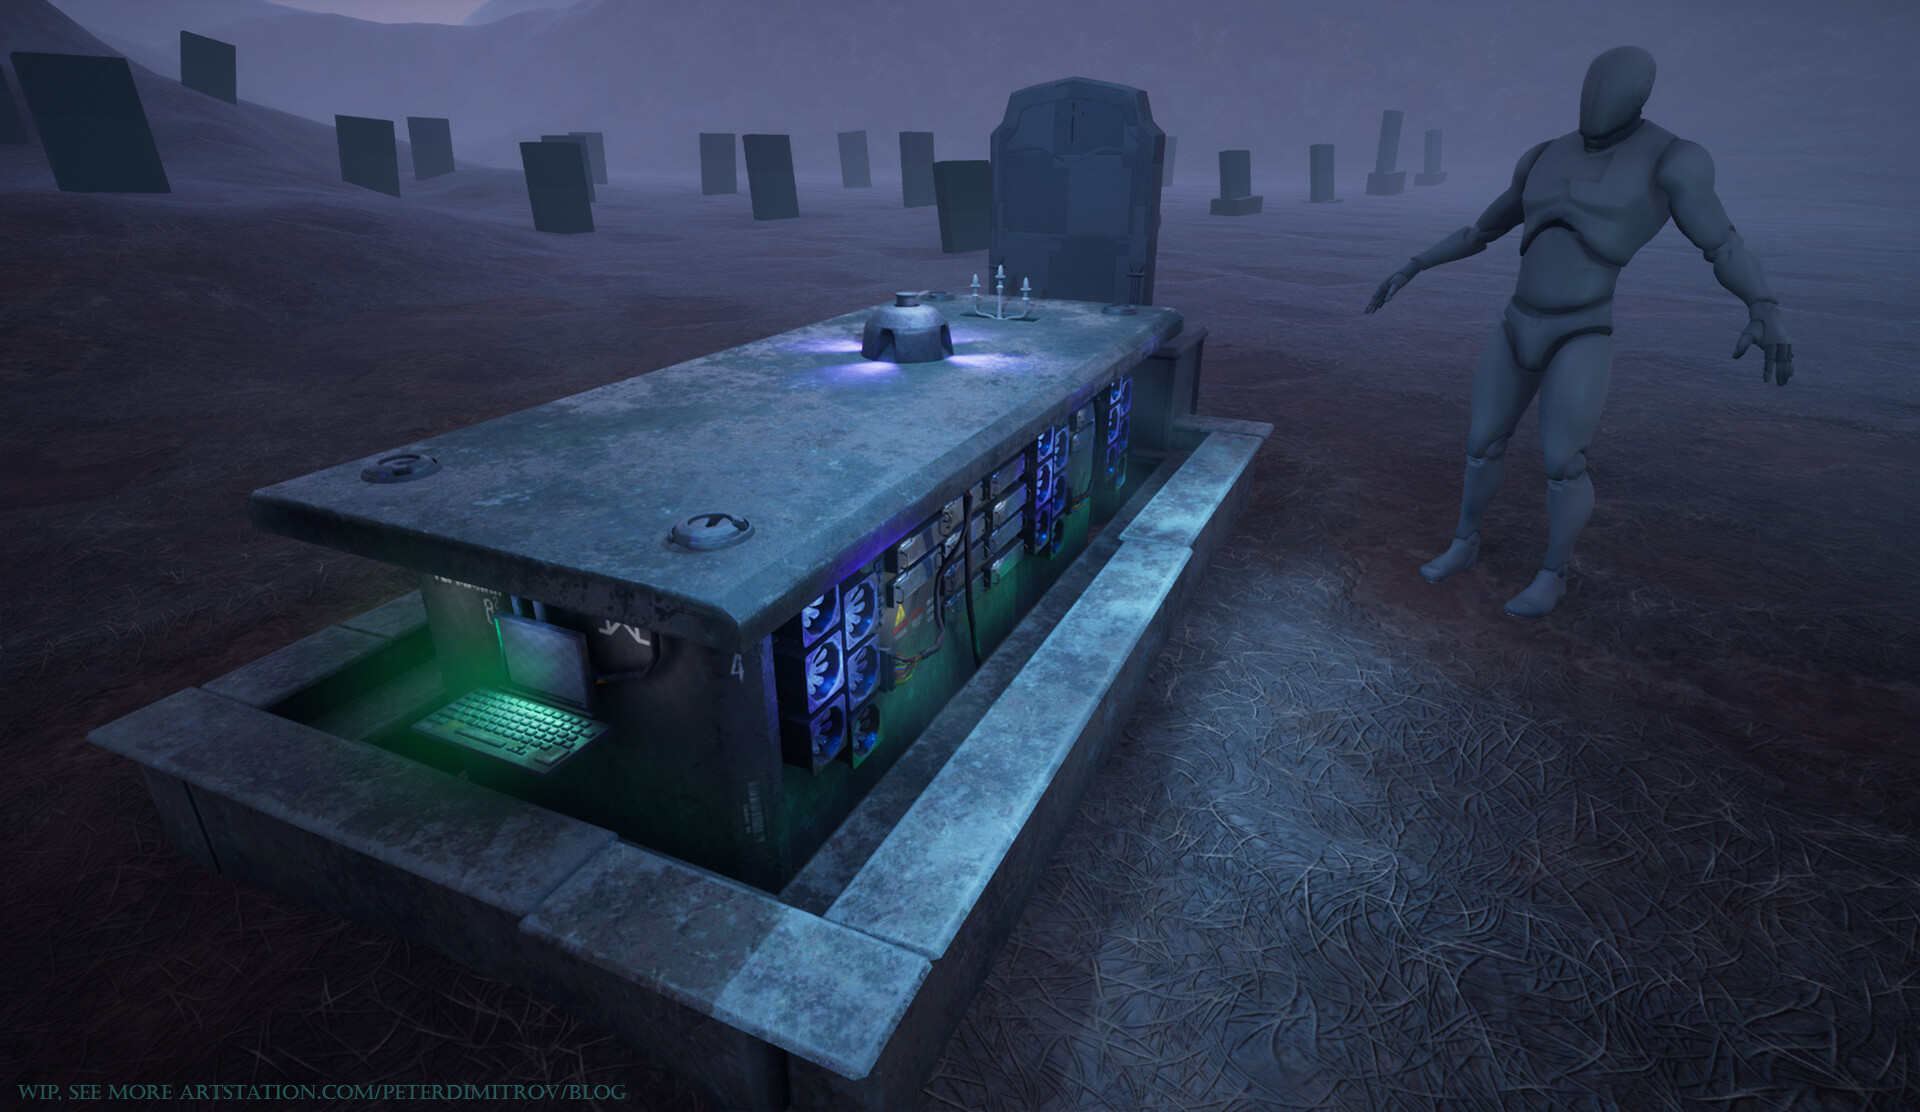 Screenshot from Unreal showcasing flat land with a mannequin in A pose. Next to the dummy is the open graveyard casket, turned into a server rack. Lots of green and blue, cyberpunk lights are scattered on it.